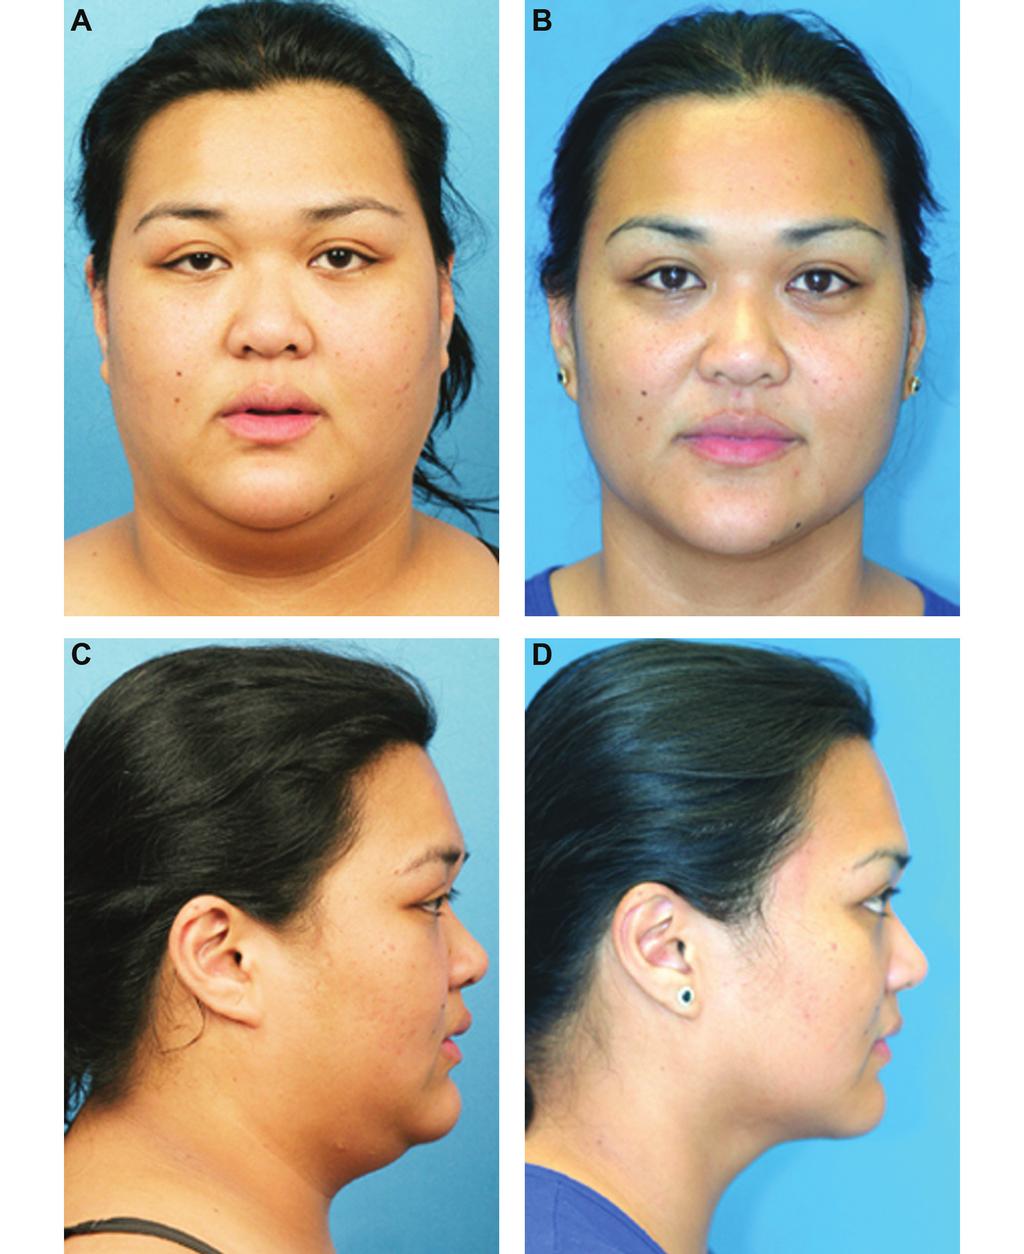 18 Aesthetic Surgery Journal 32(1) Figure 13. (A, C) This 29-year-old woman presented with platysmal banding on animation and fat deposition.